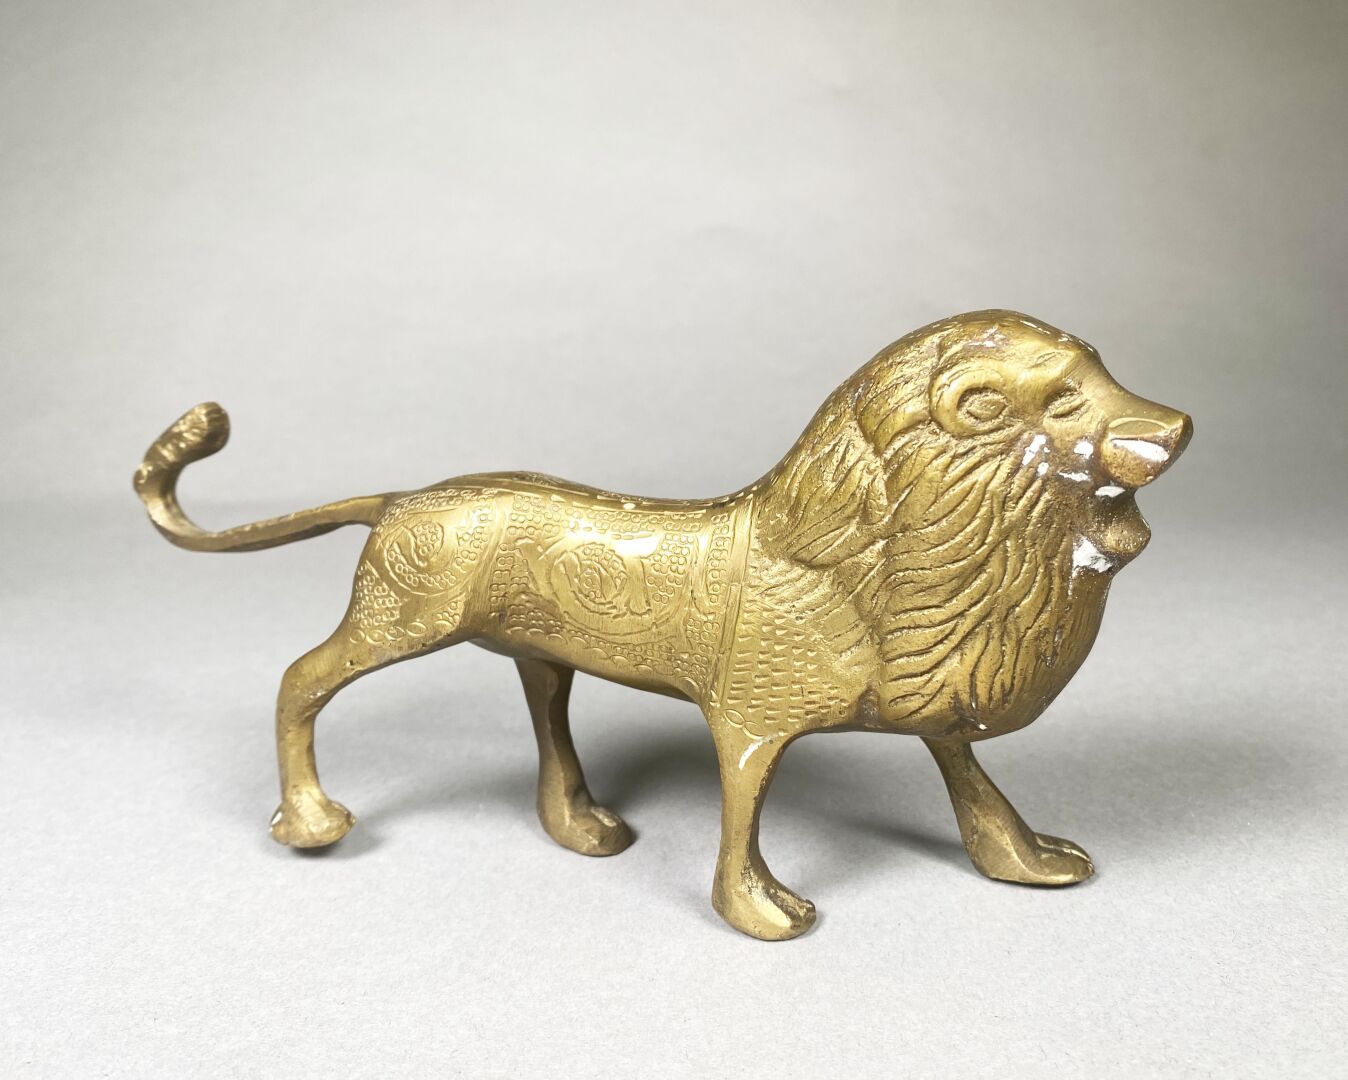 Null Lion 
Proof in gilded and chased bronze
10 x 19 x 4 cm